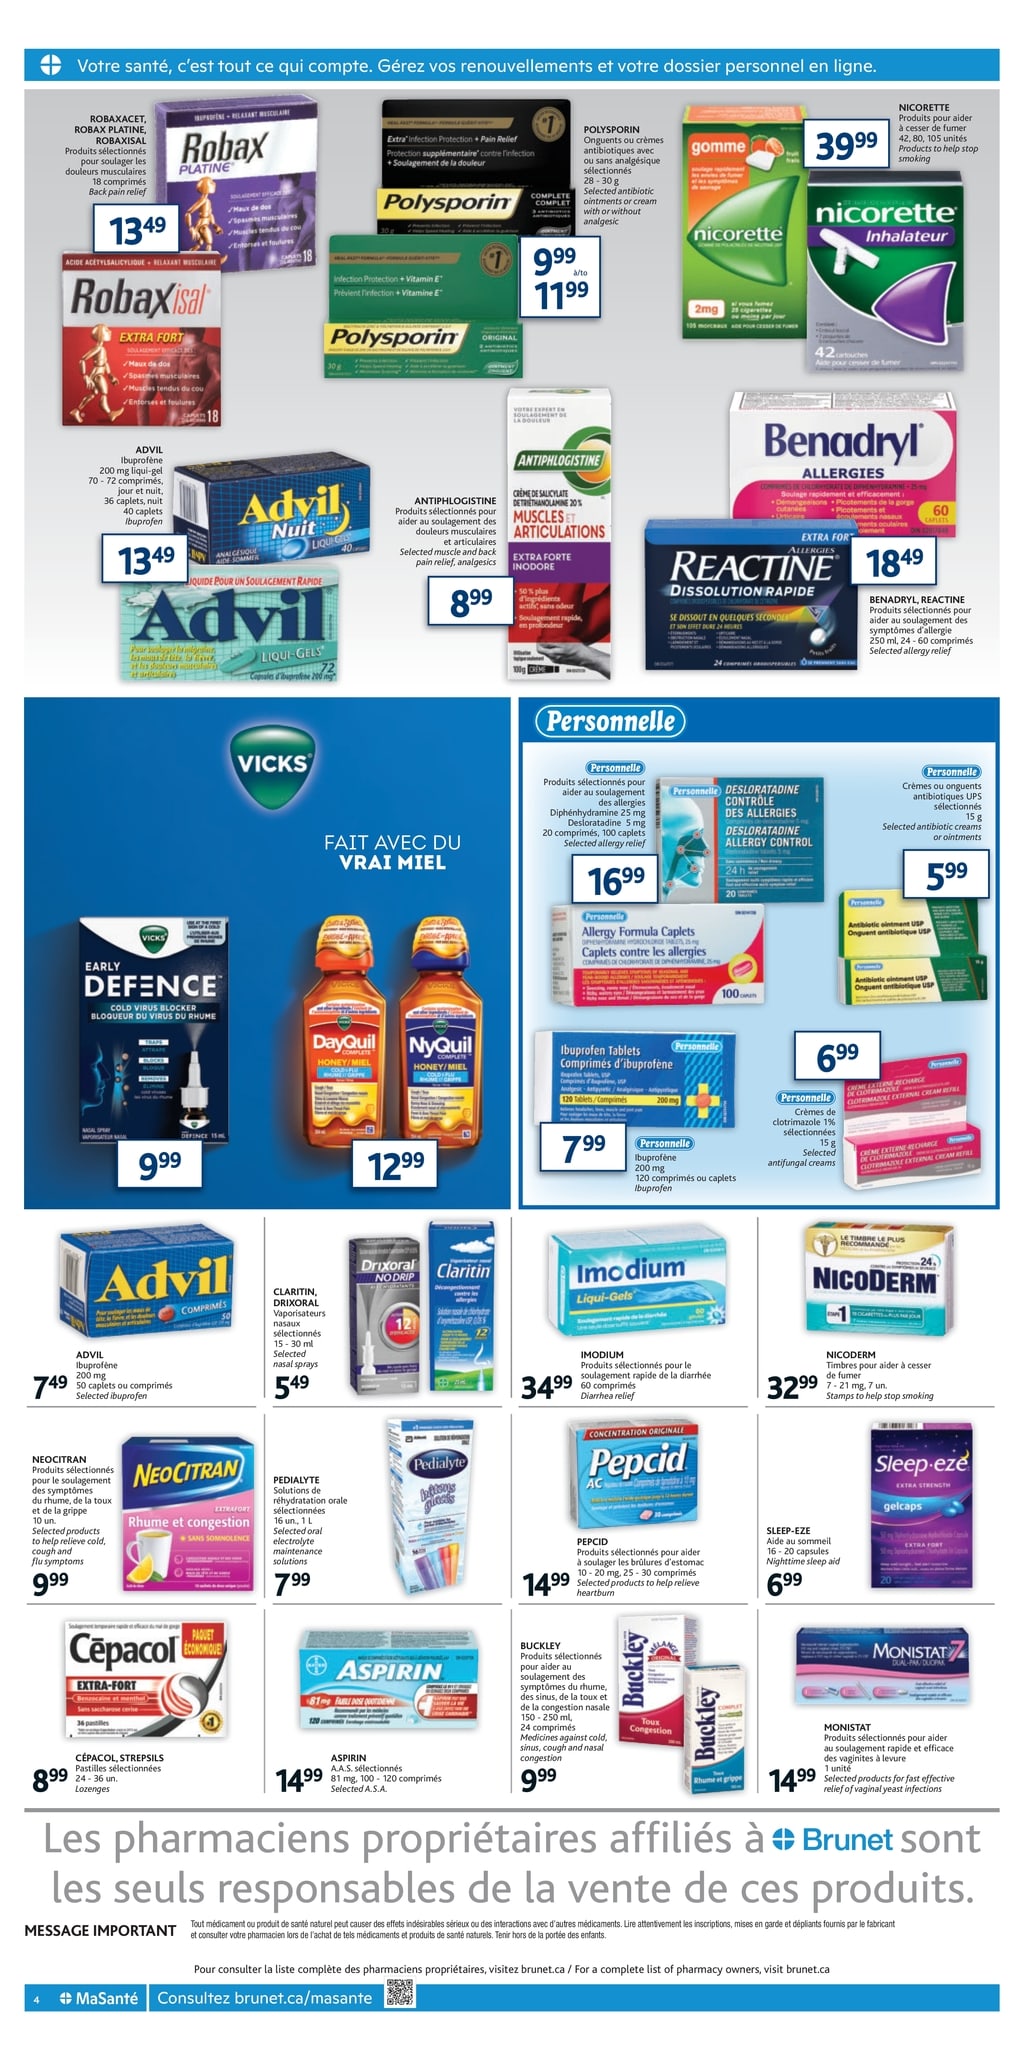 Circulaire Brunet - Pharmacie - Page 4